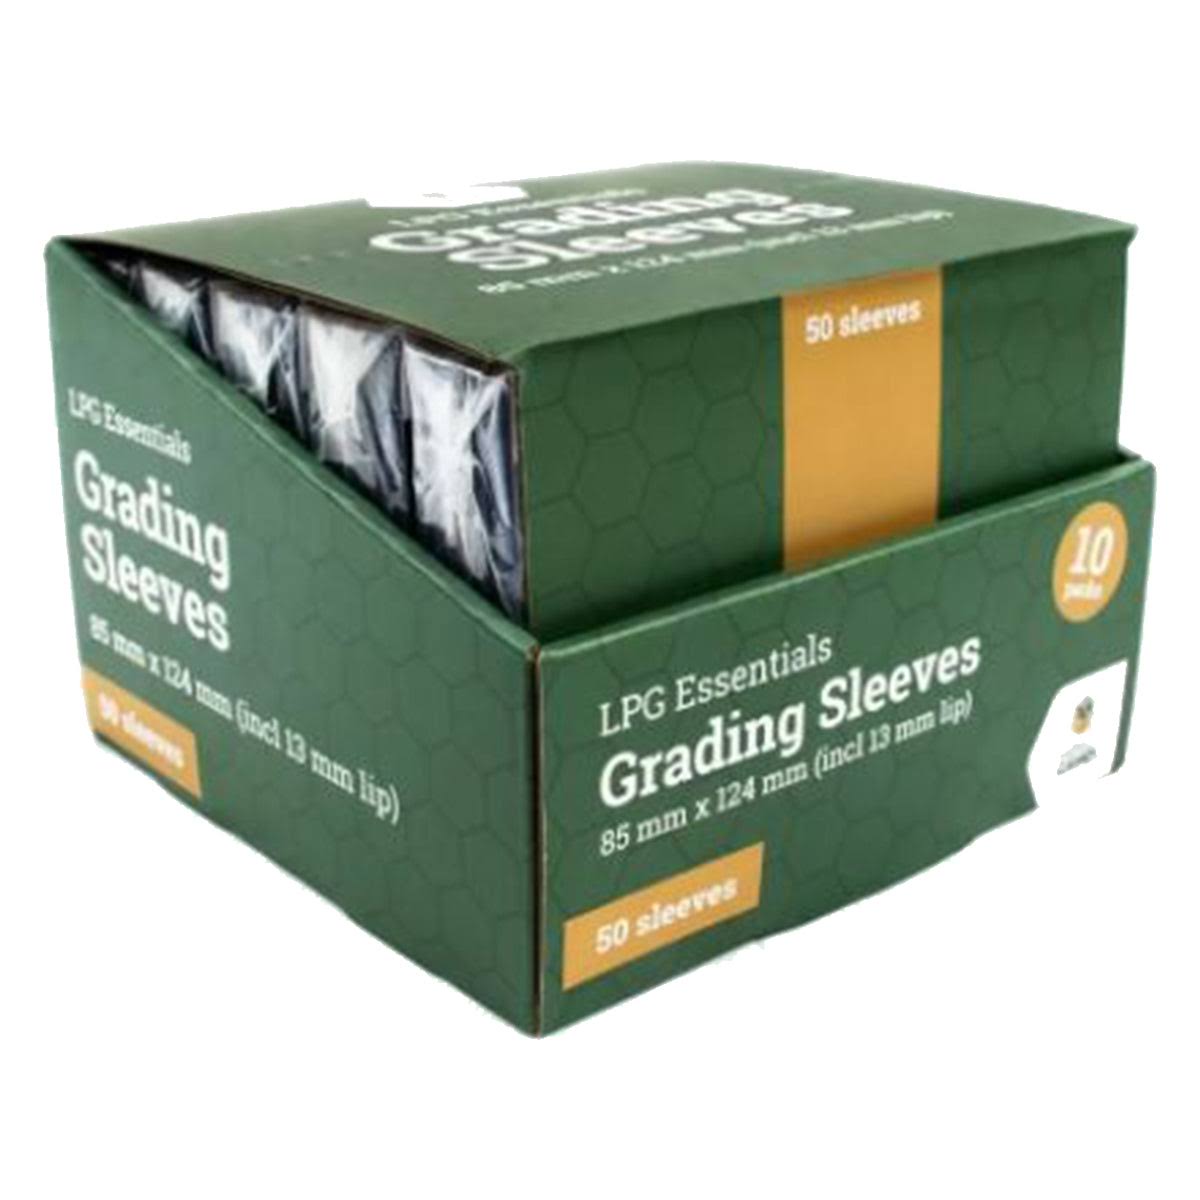 LPG Grading Sleeves 85 x 124mm 50 Pack Display (10) | Ozzie Collectables